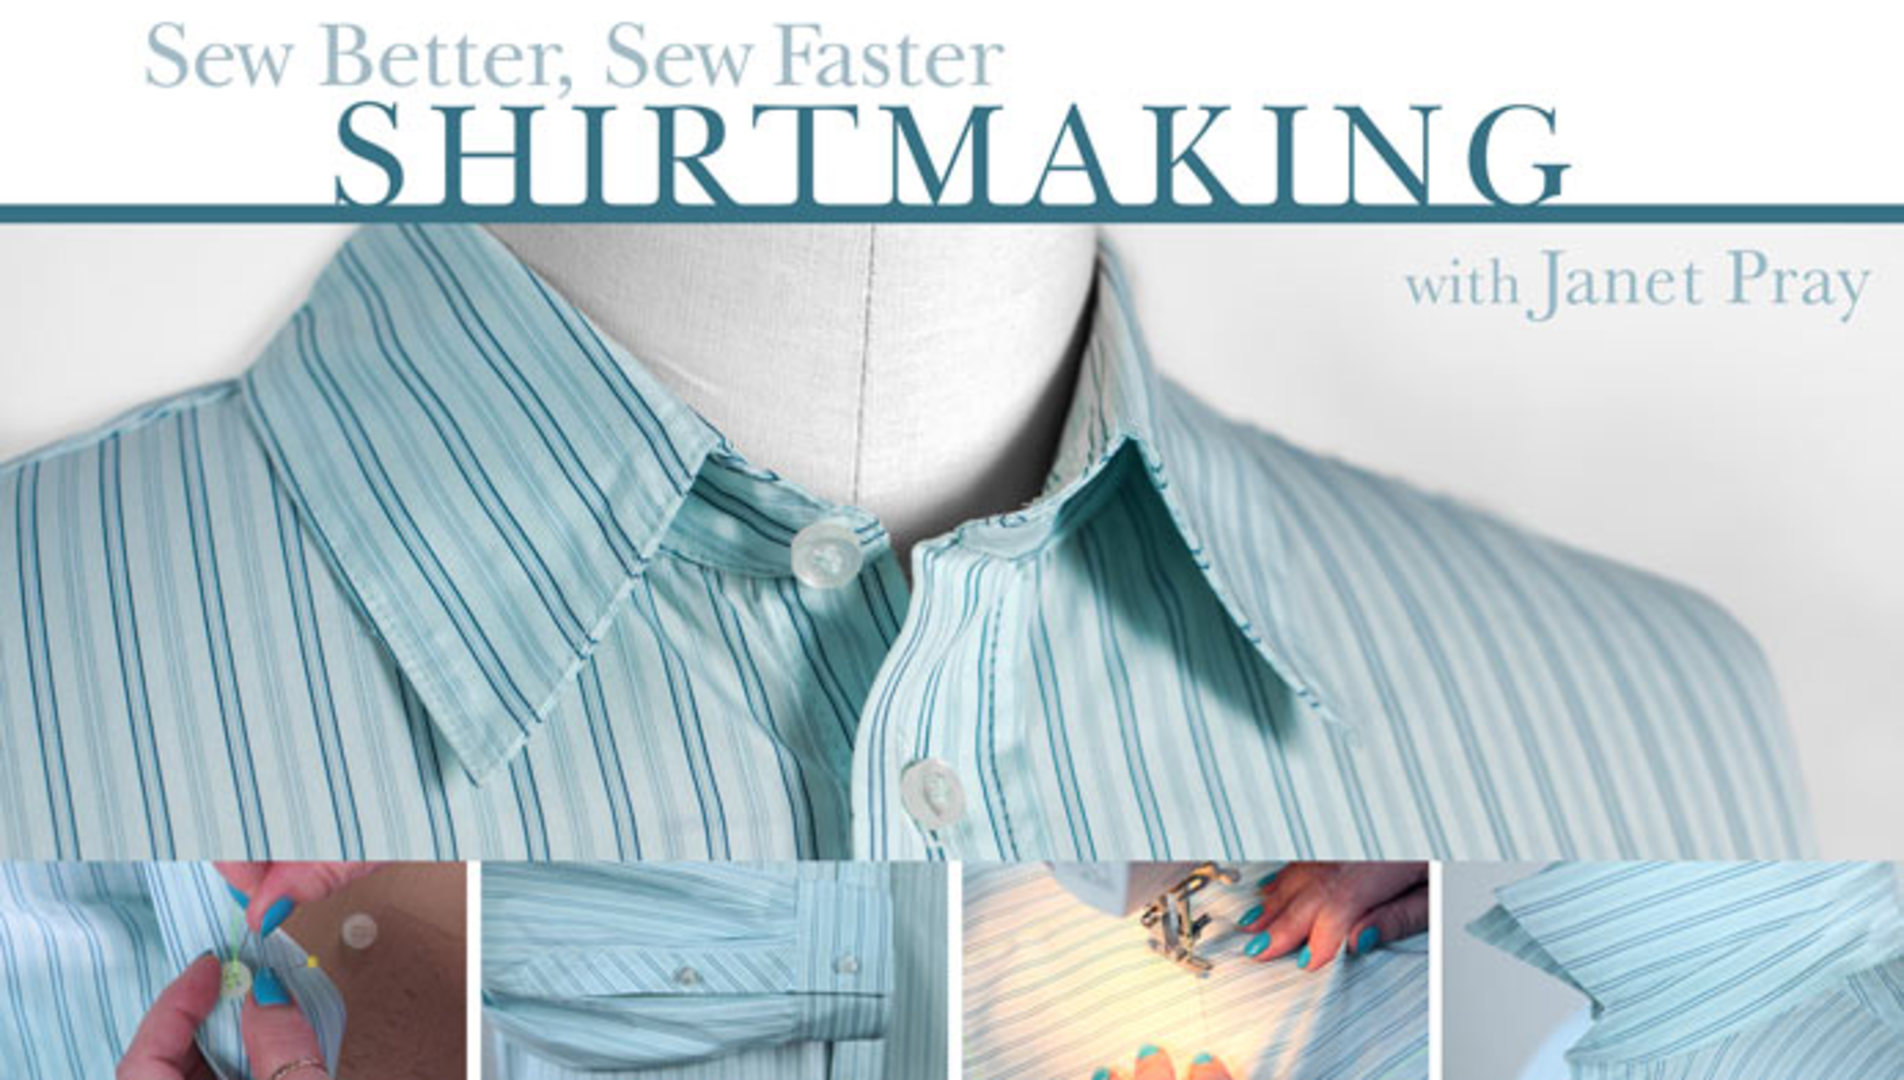 Sew Better, Sew Faster: Shirtmaking | Craftsy